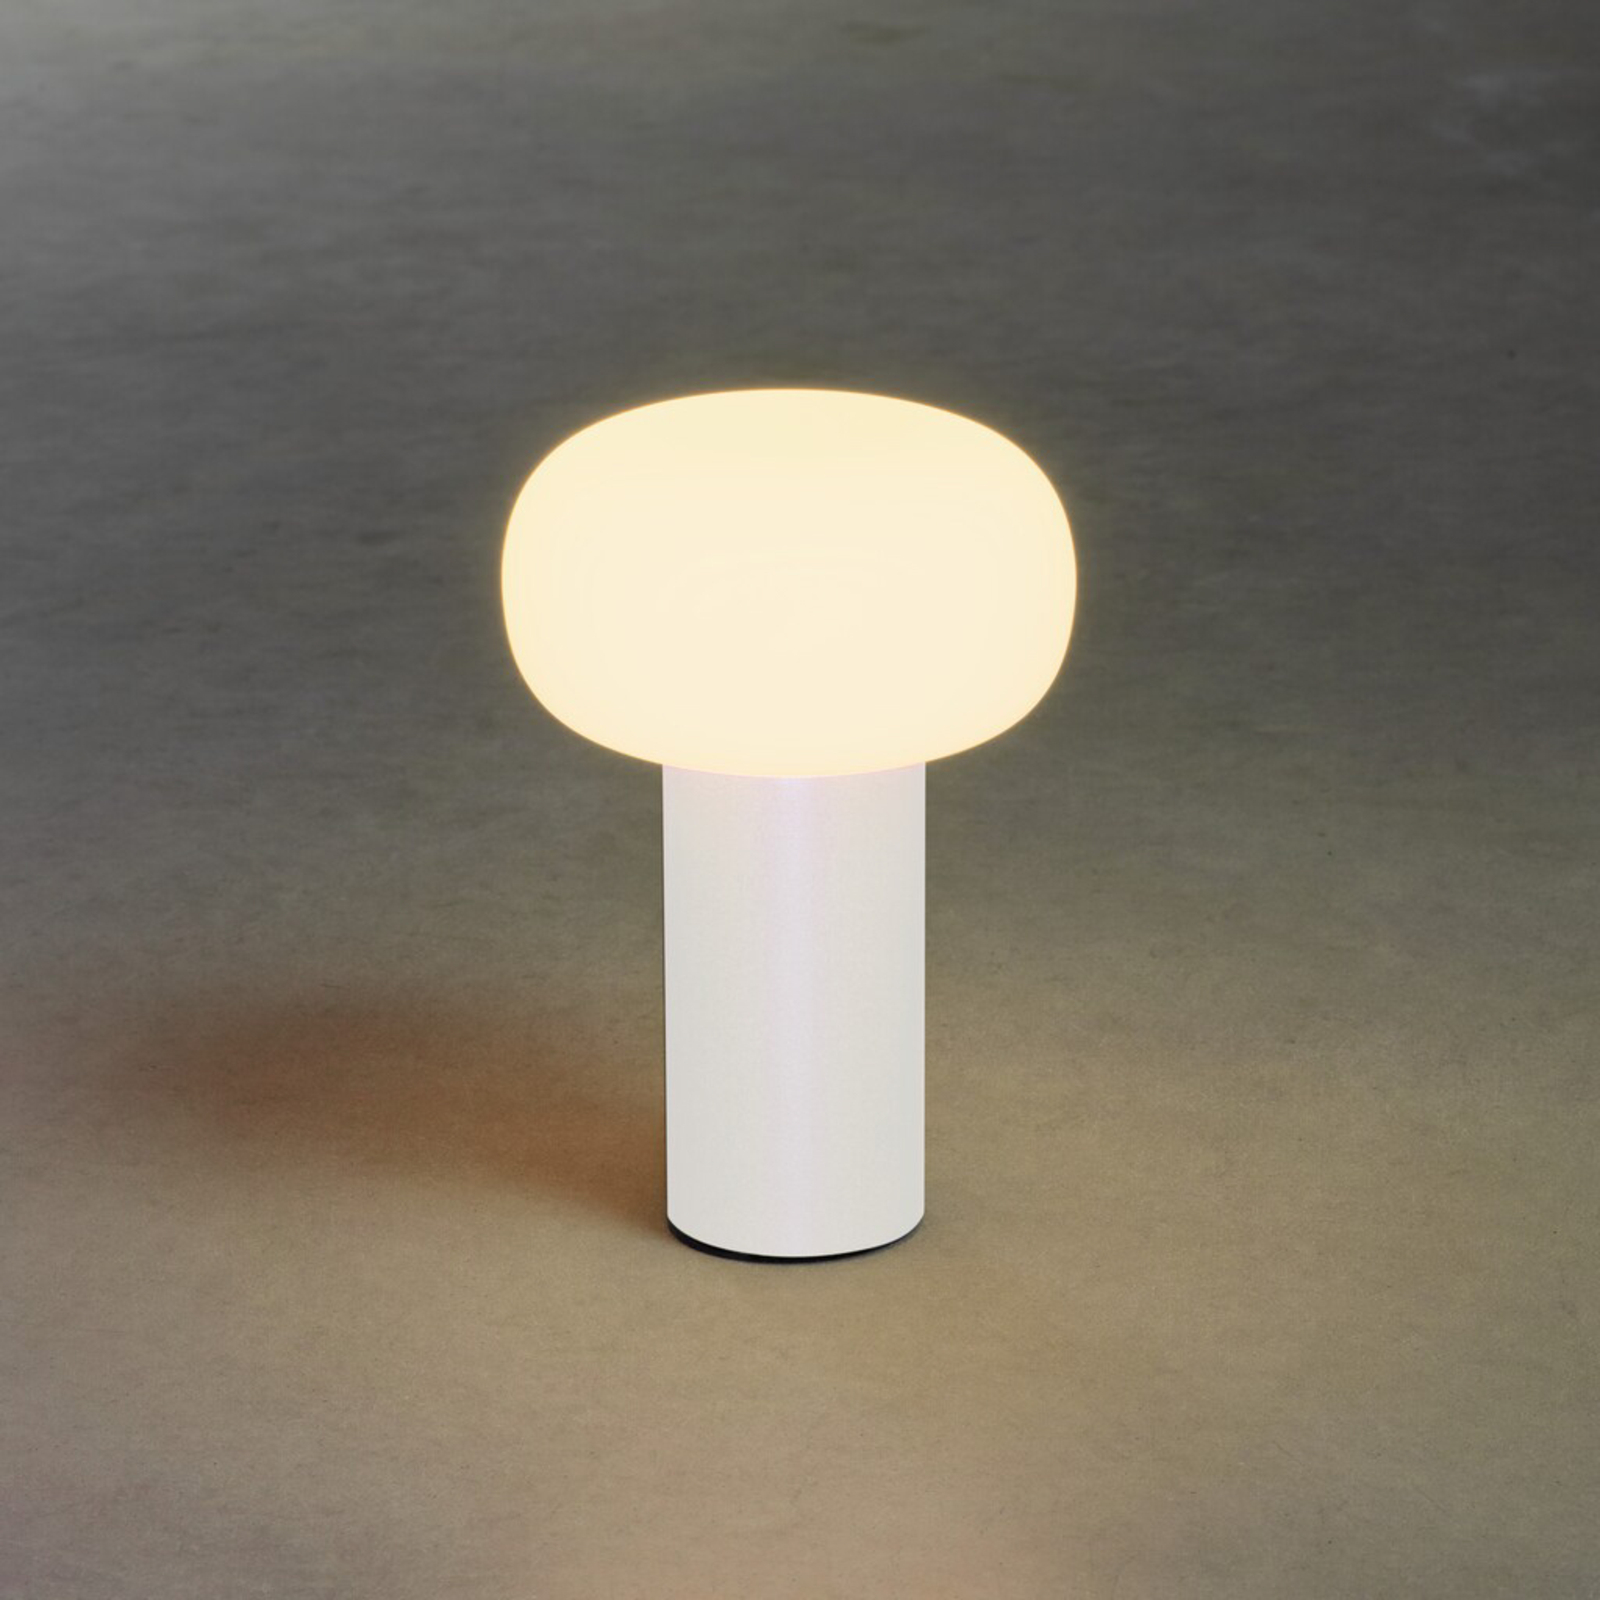 Lampe table LED Antibes IP54 batterie RGBW blanche